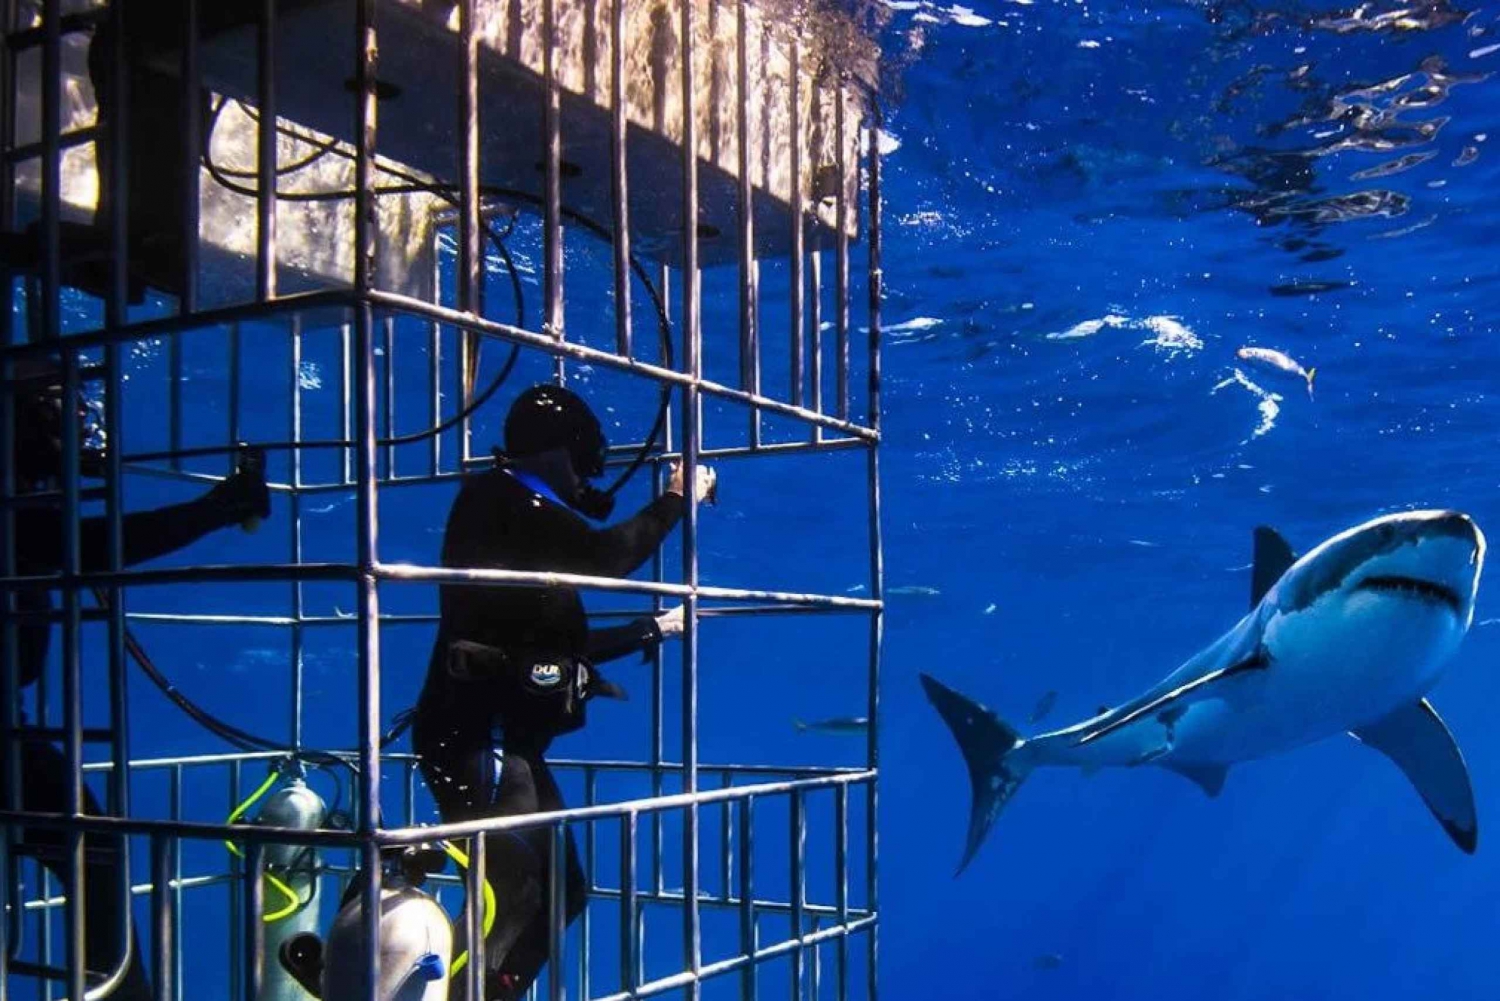 Full Day Private: Shark Cage Diving